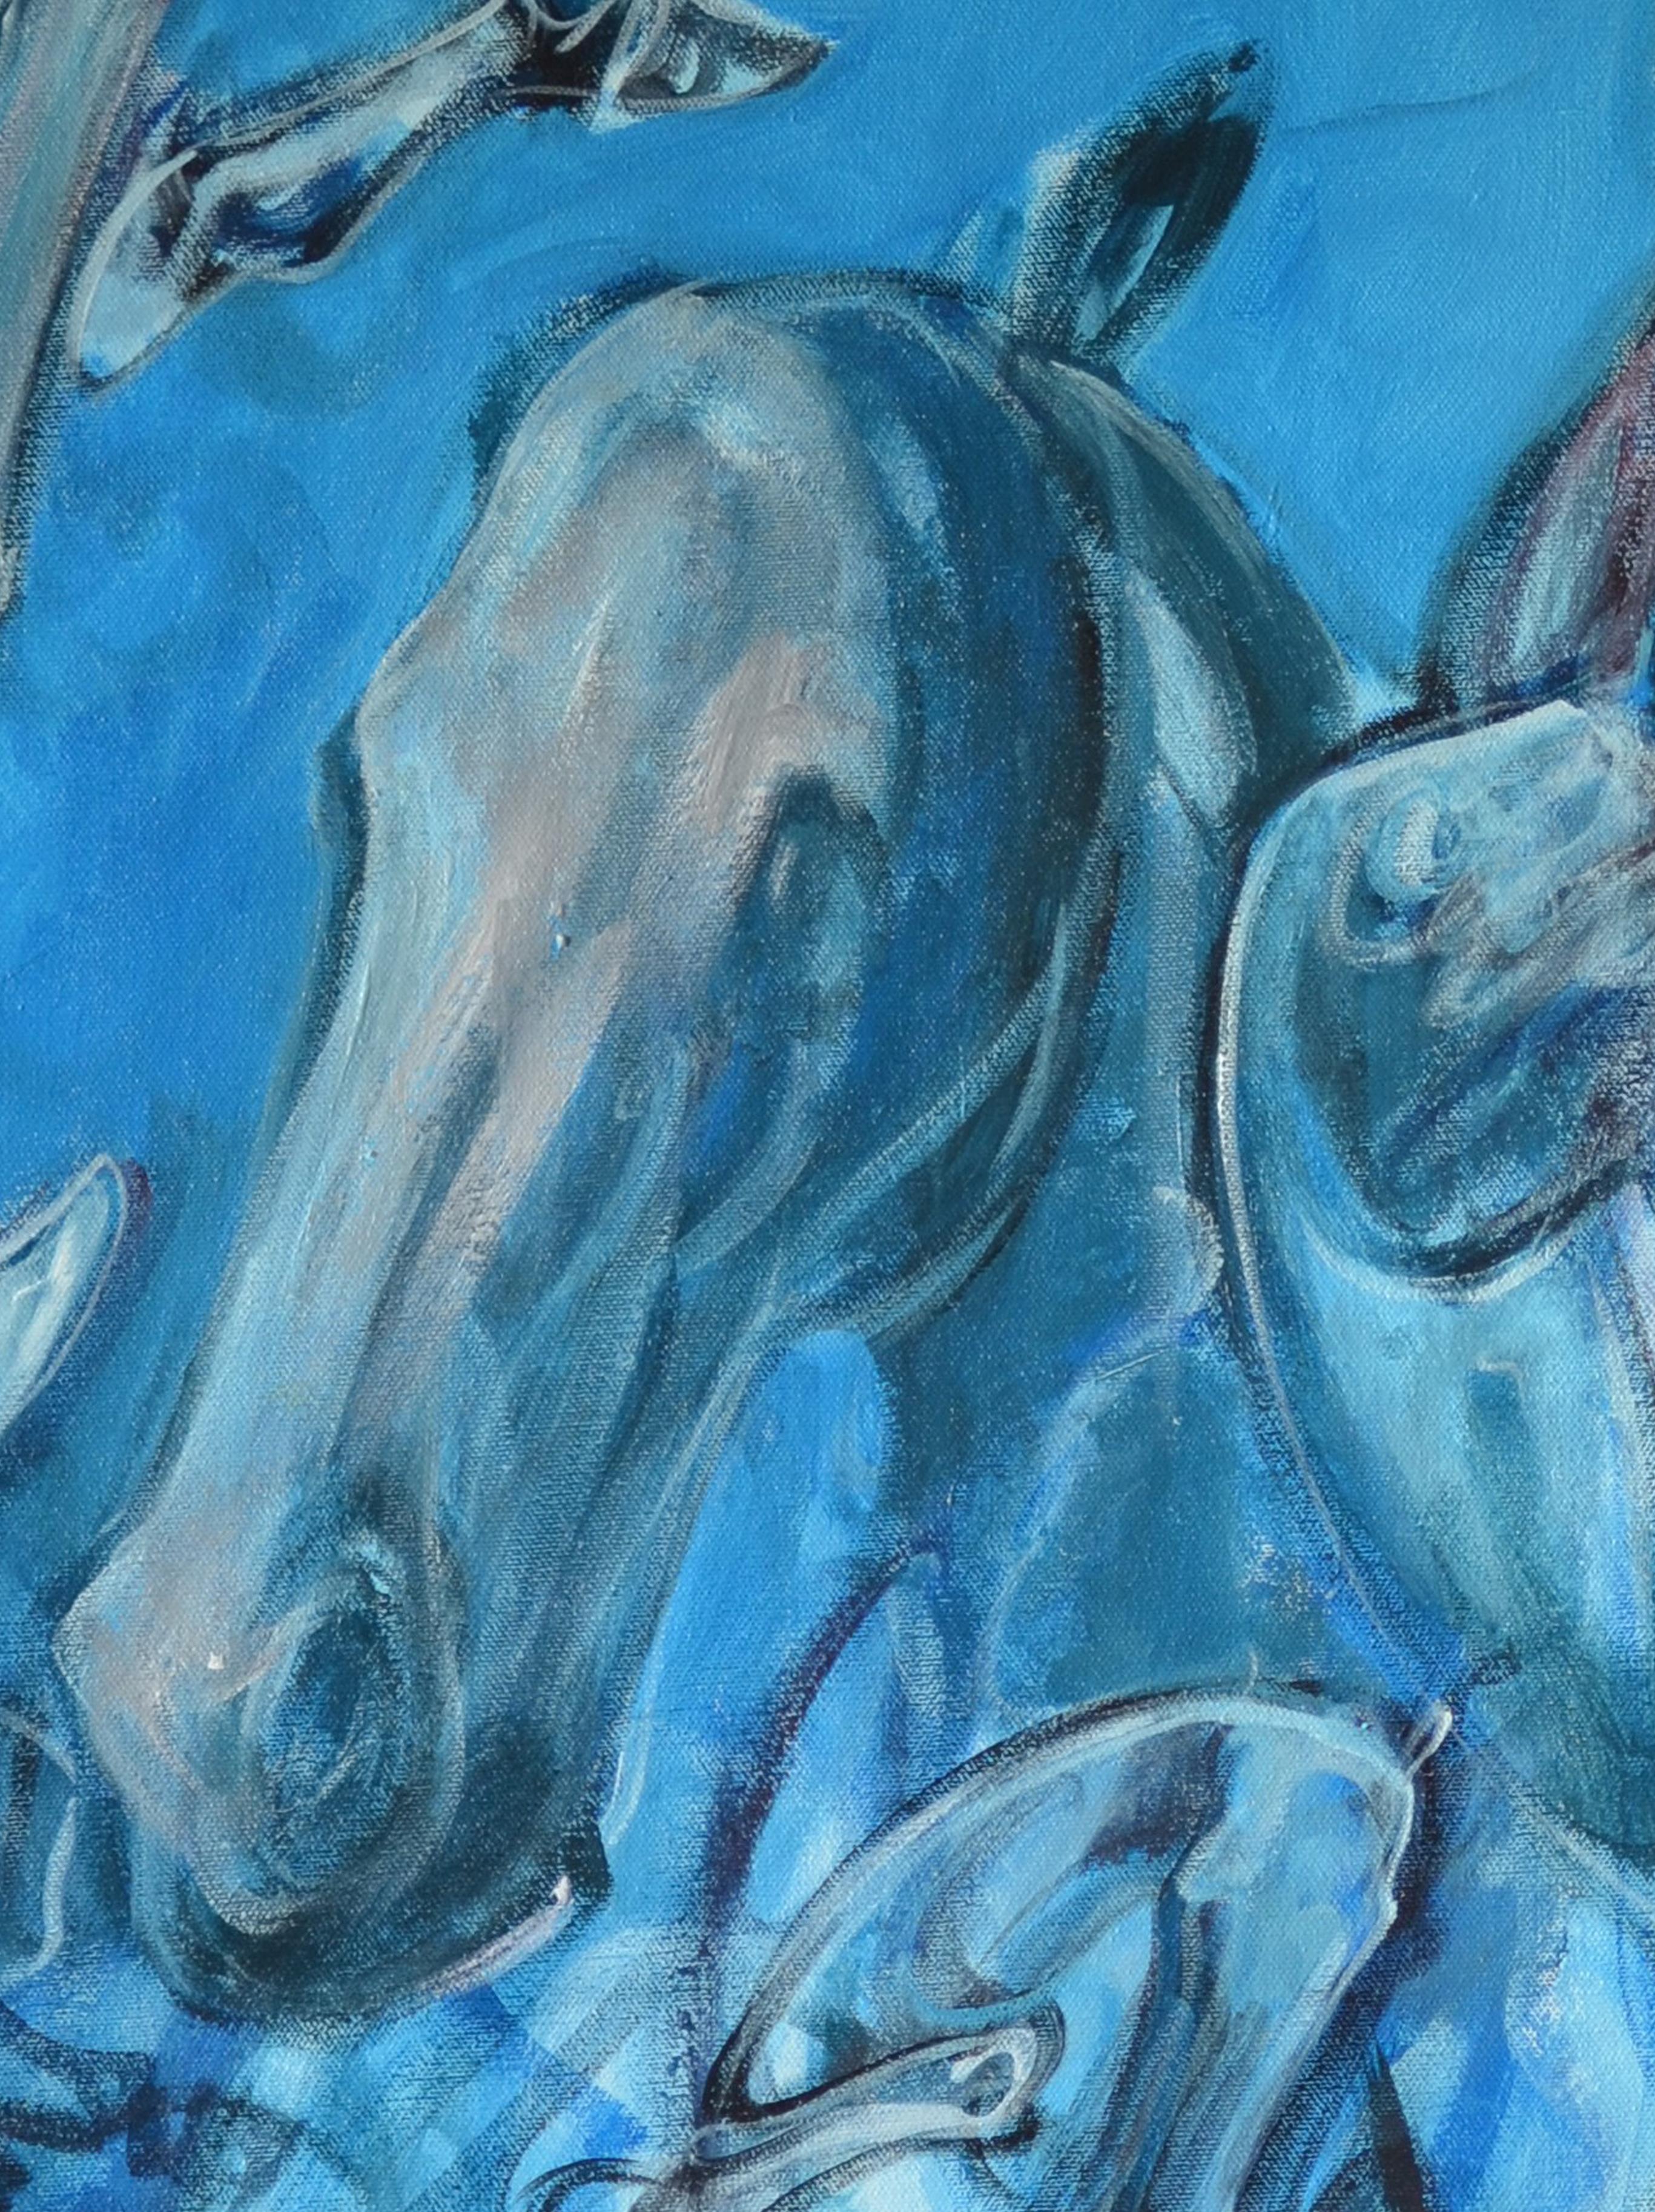 Abstract Horses Acrylic on Canvas Painting Titled 